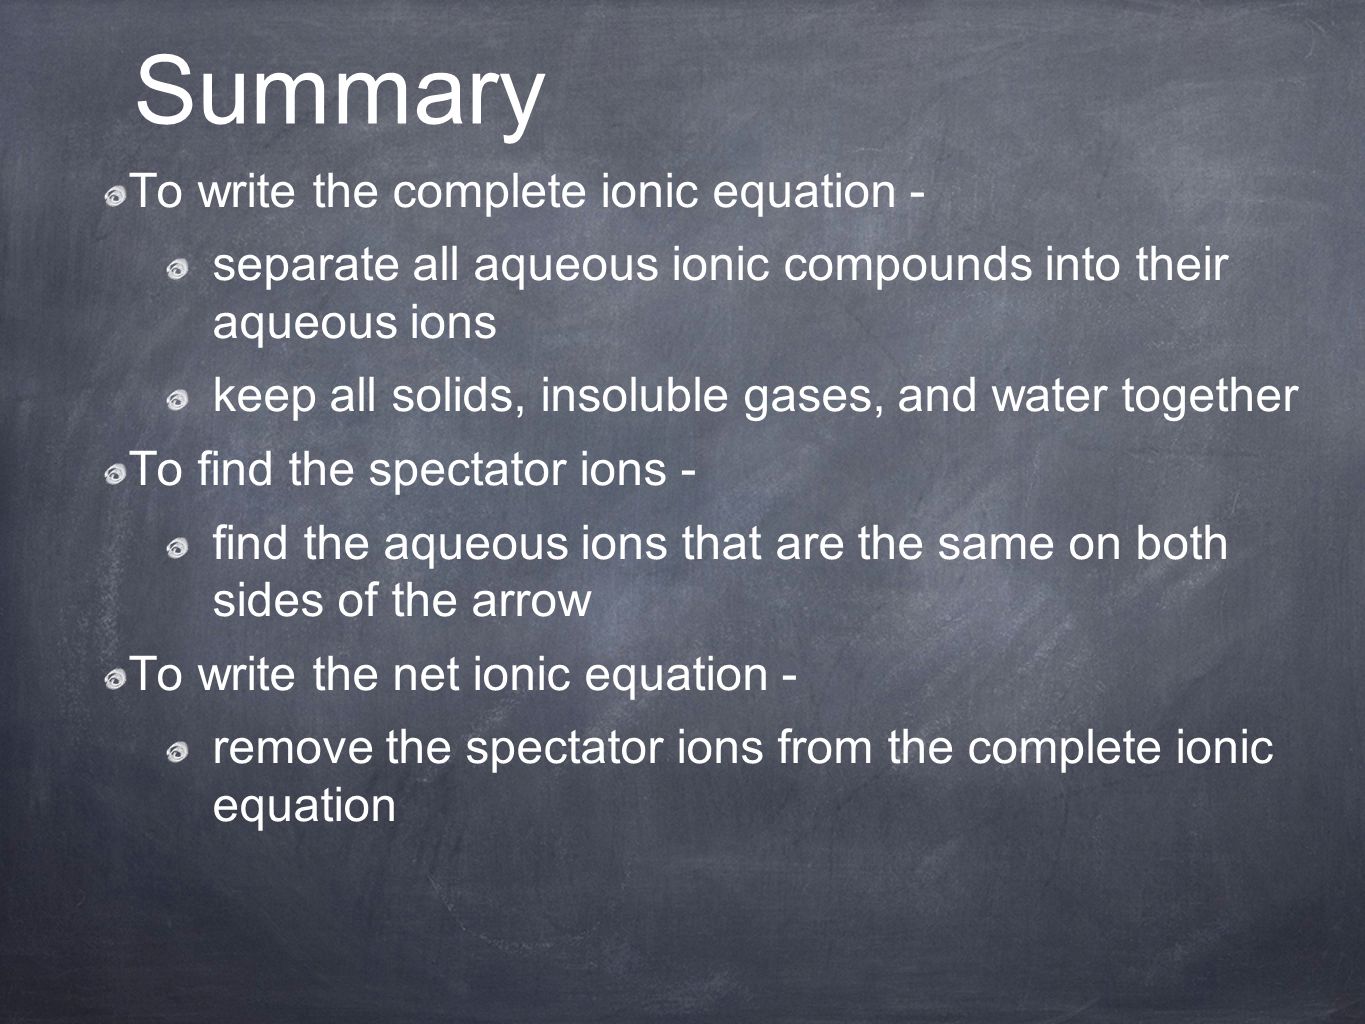 To write the complete ionic equation - separate all aqueous ionic compounds into their aqueous ions keep all solids, insoluble gases, and water together To find the spectator ions - find the aqueous ions that are the same on both sides of the arrow To write the net ionic equation - remove the spectator ions from the complete ionic equation Summary